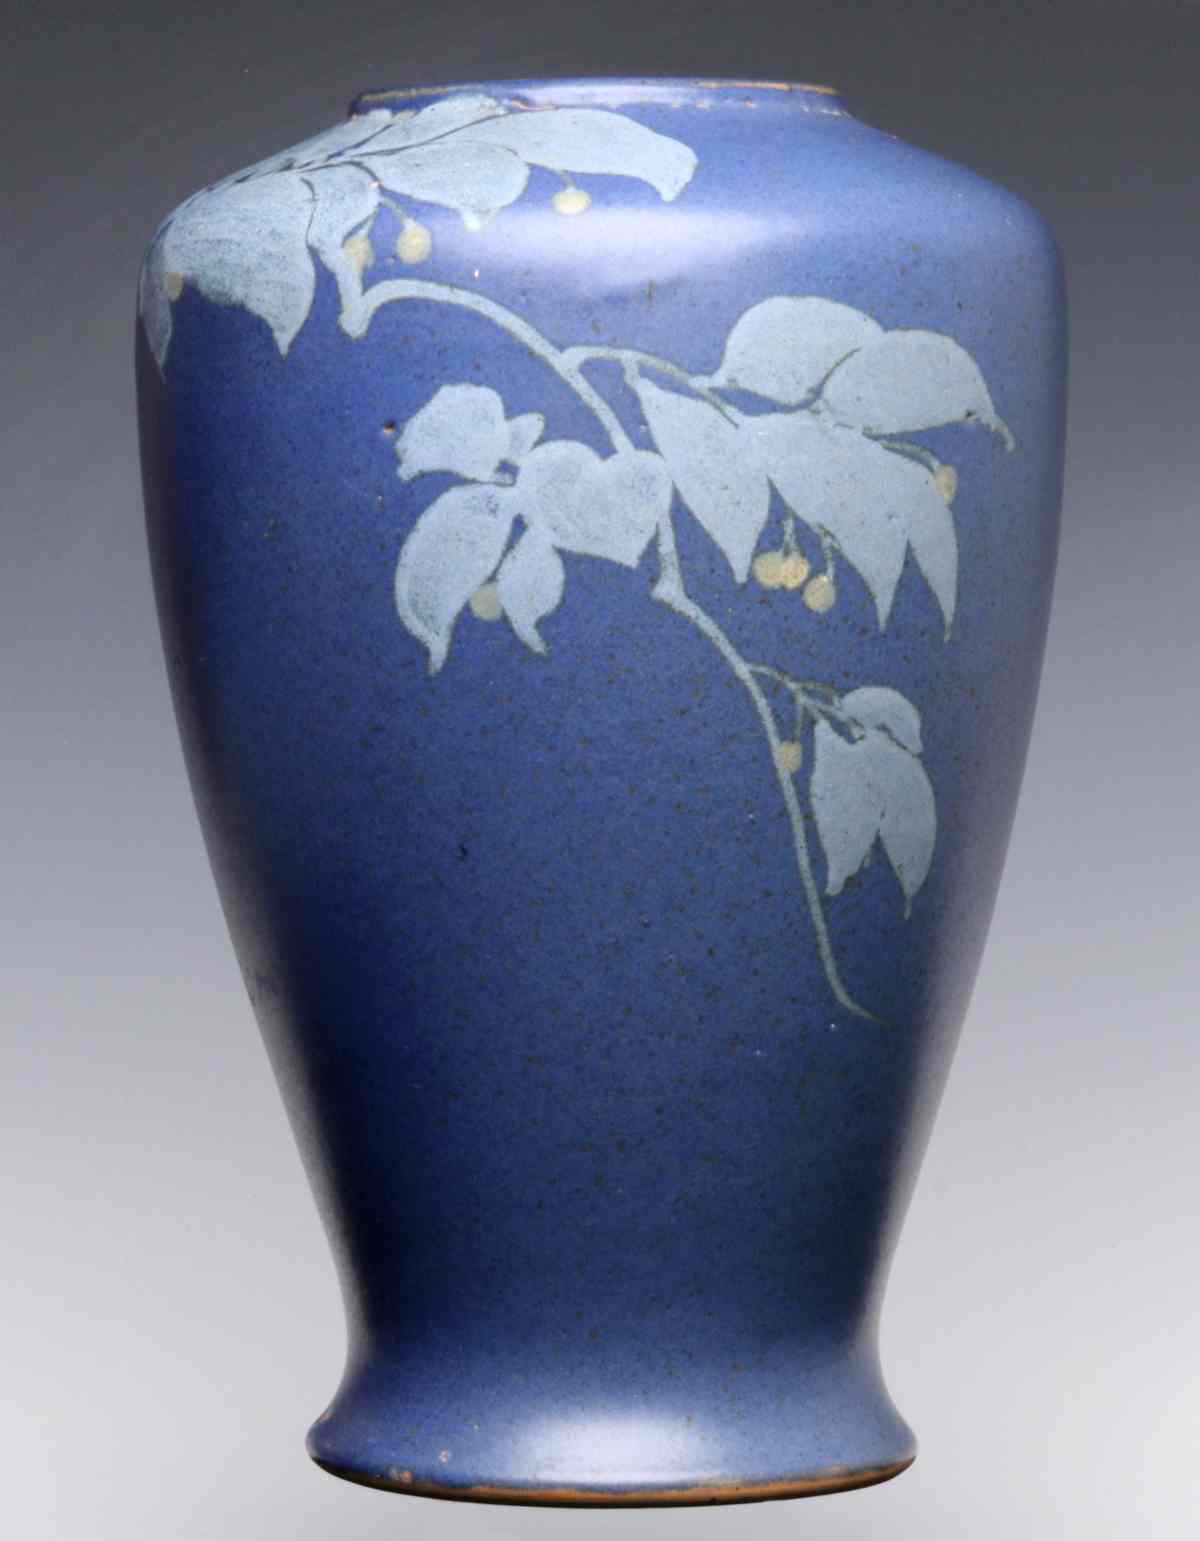 A GOOD LATE 19TH / EARLY 20TH C ASIAN POTTERY VASE